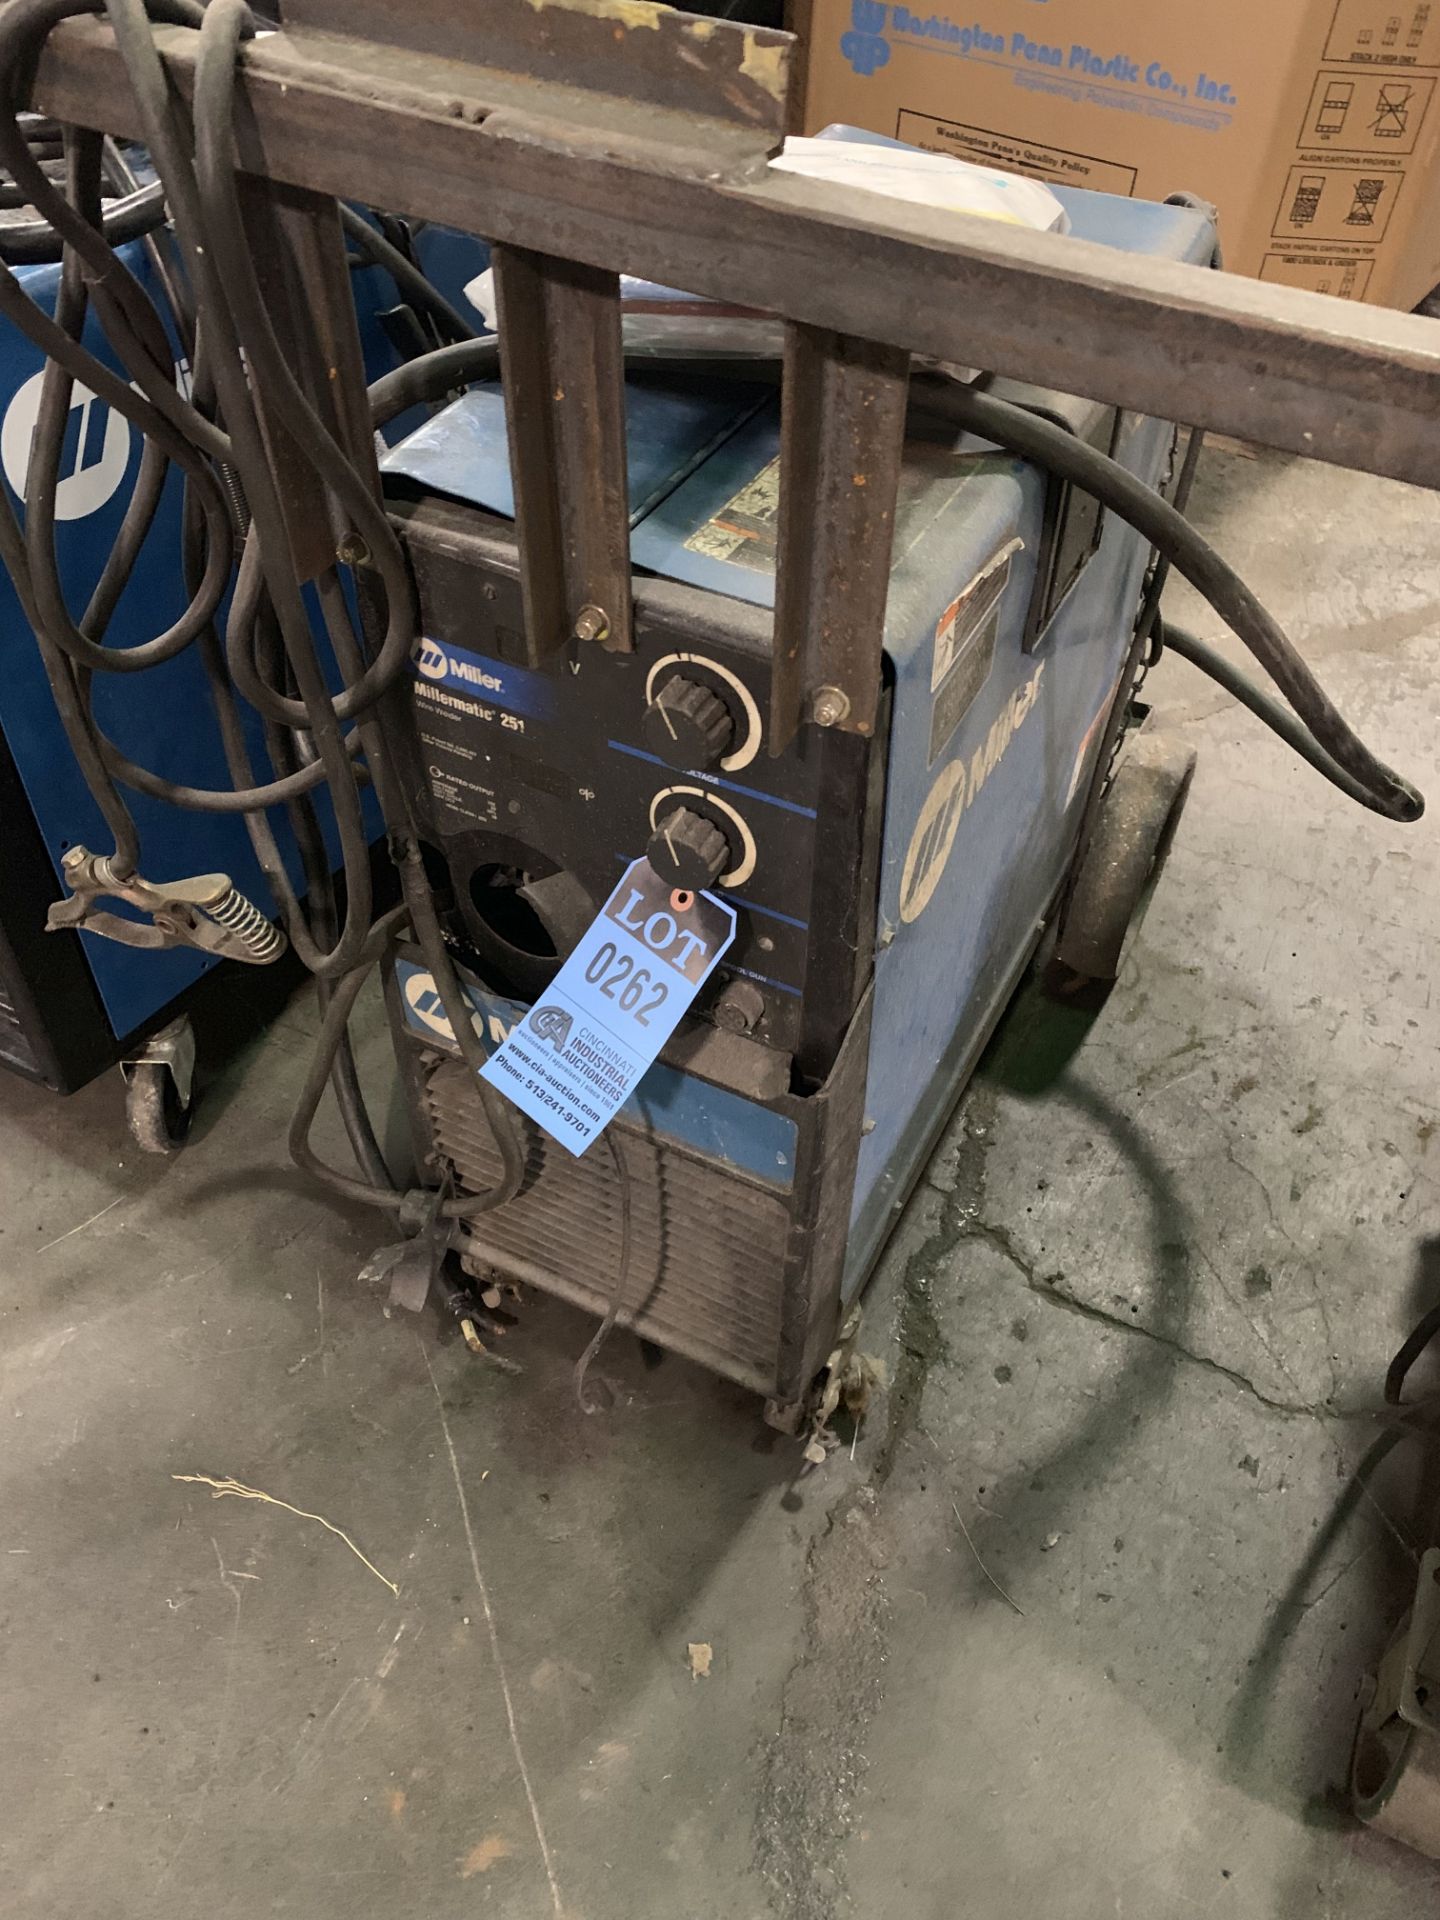 200 AMP MILLER MILLERMATIC 251 MIG WELDER - NO GUN **LOCATED AT 1711 KIMBERLY PARK DRIVE**